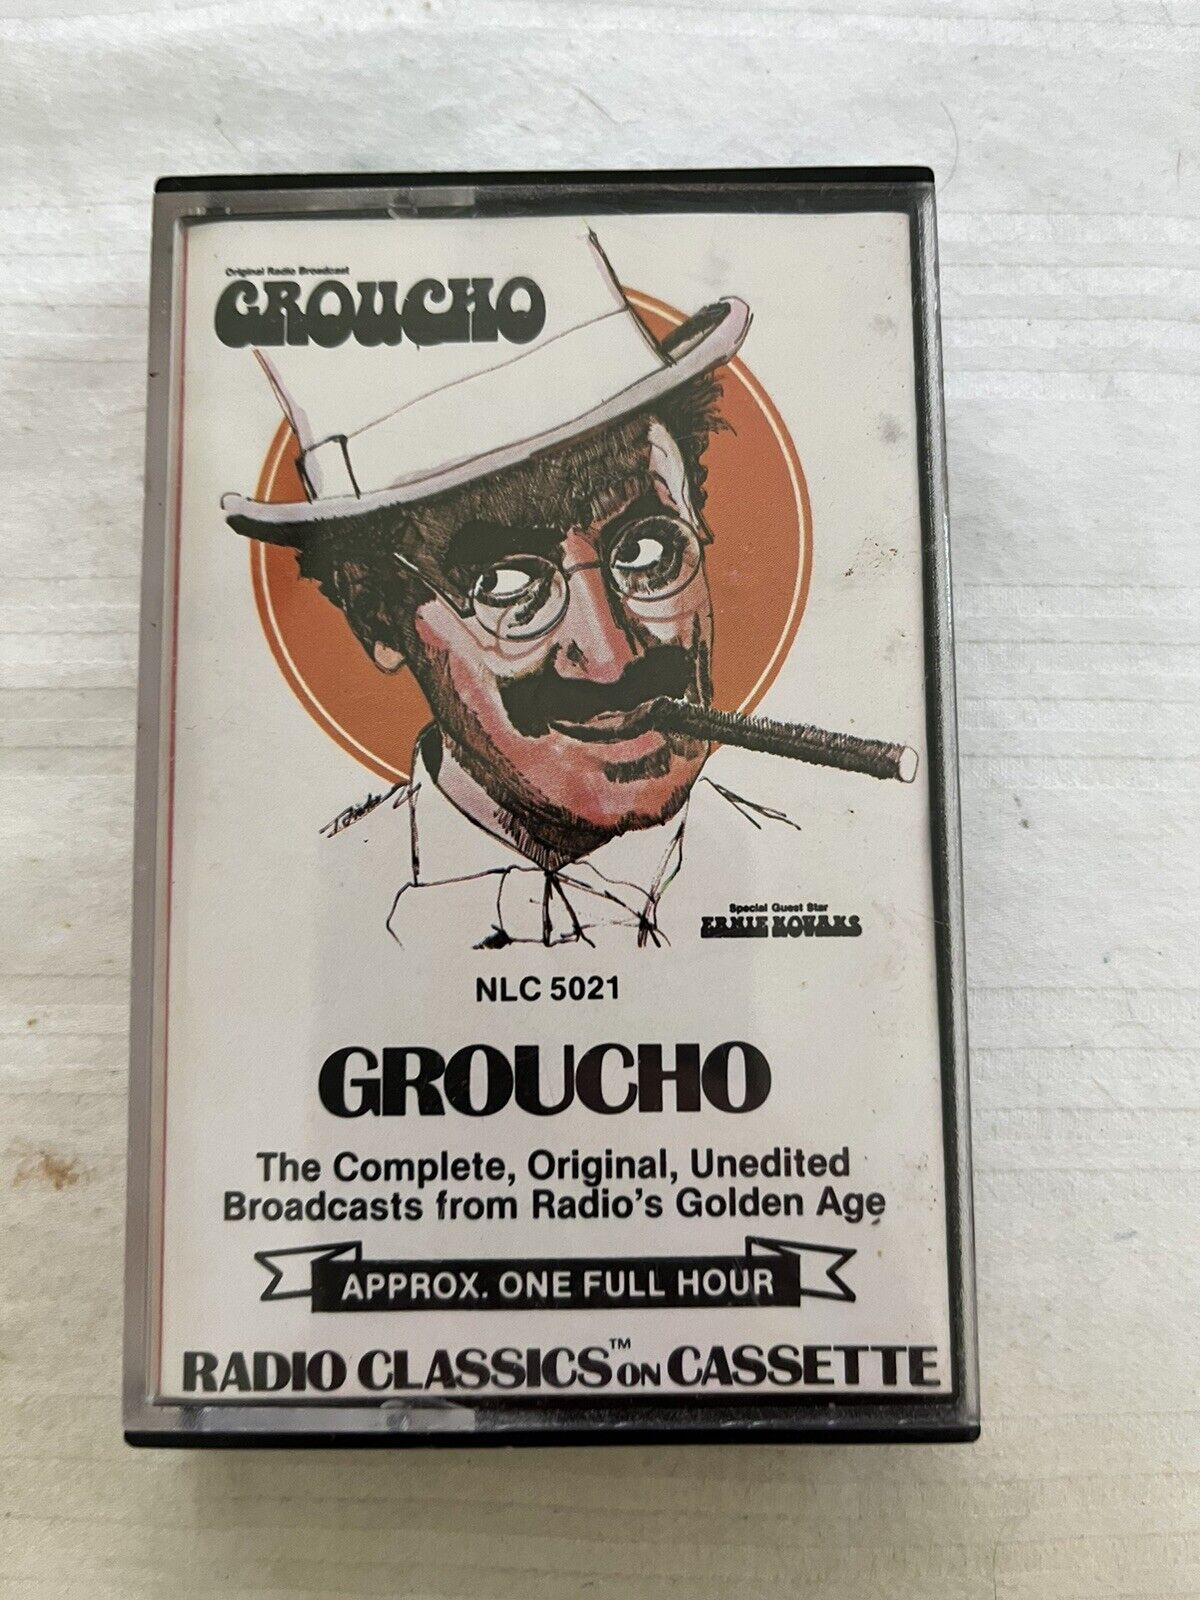 Groucho Marx Radio Classics On Tape Vintage Cassette Music 1986 Bet Your Life